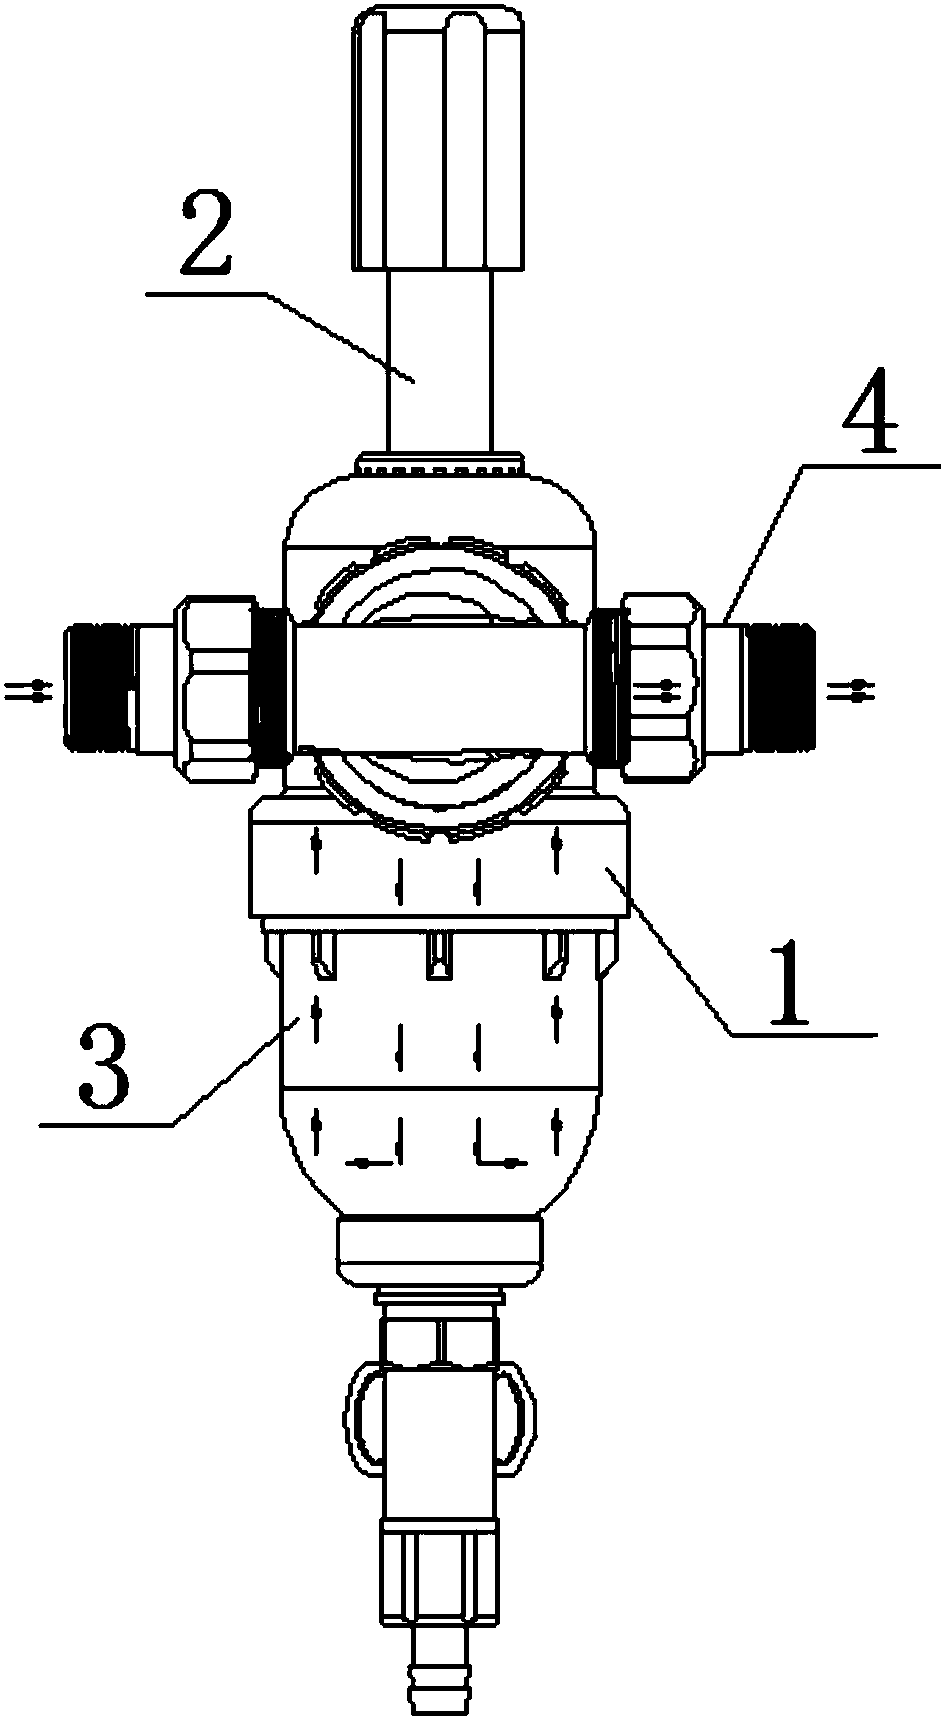 Backflush front filter with multiple filtering functions